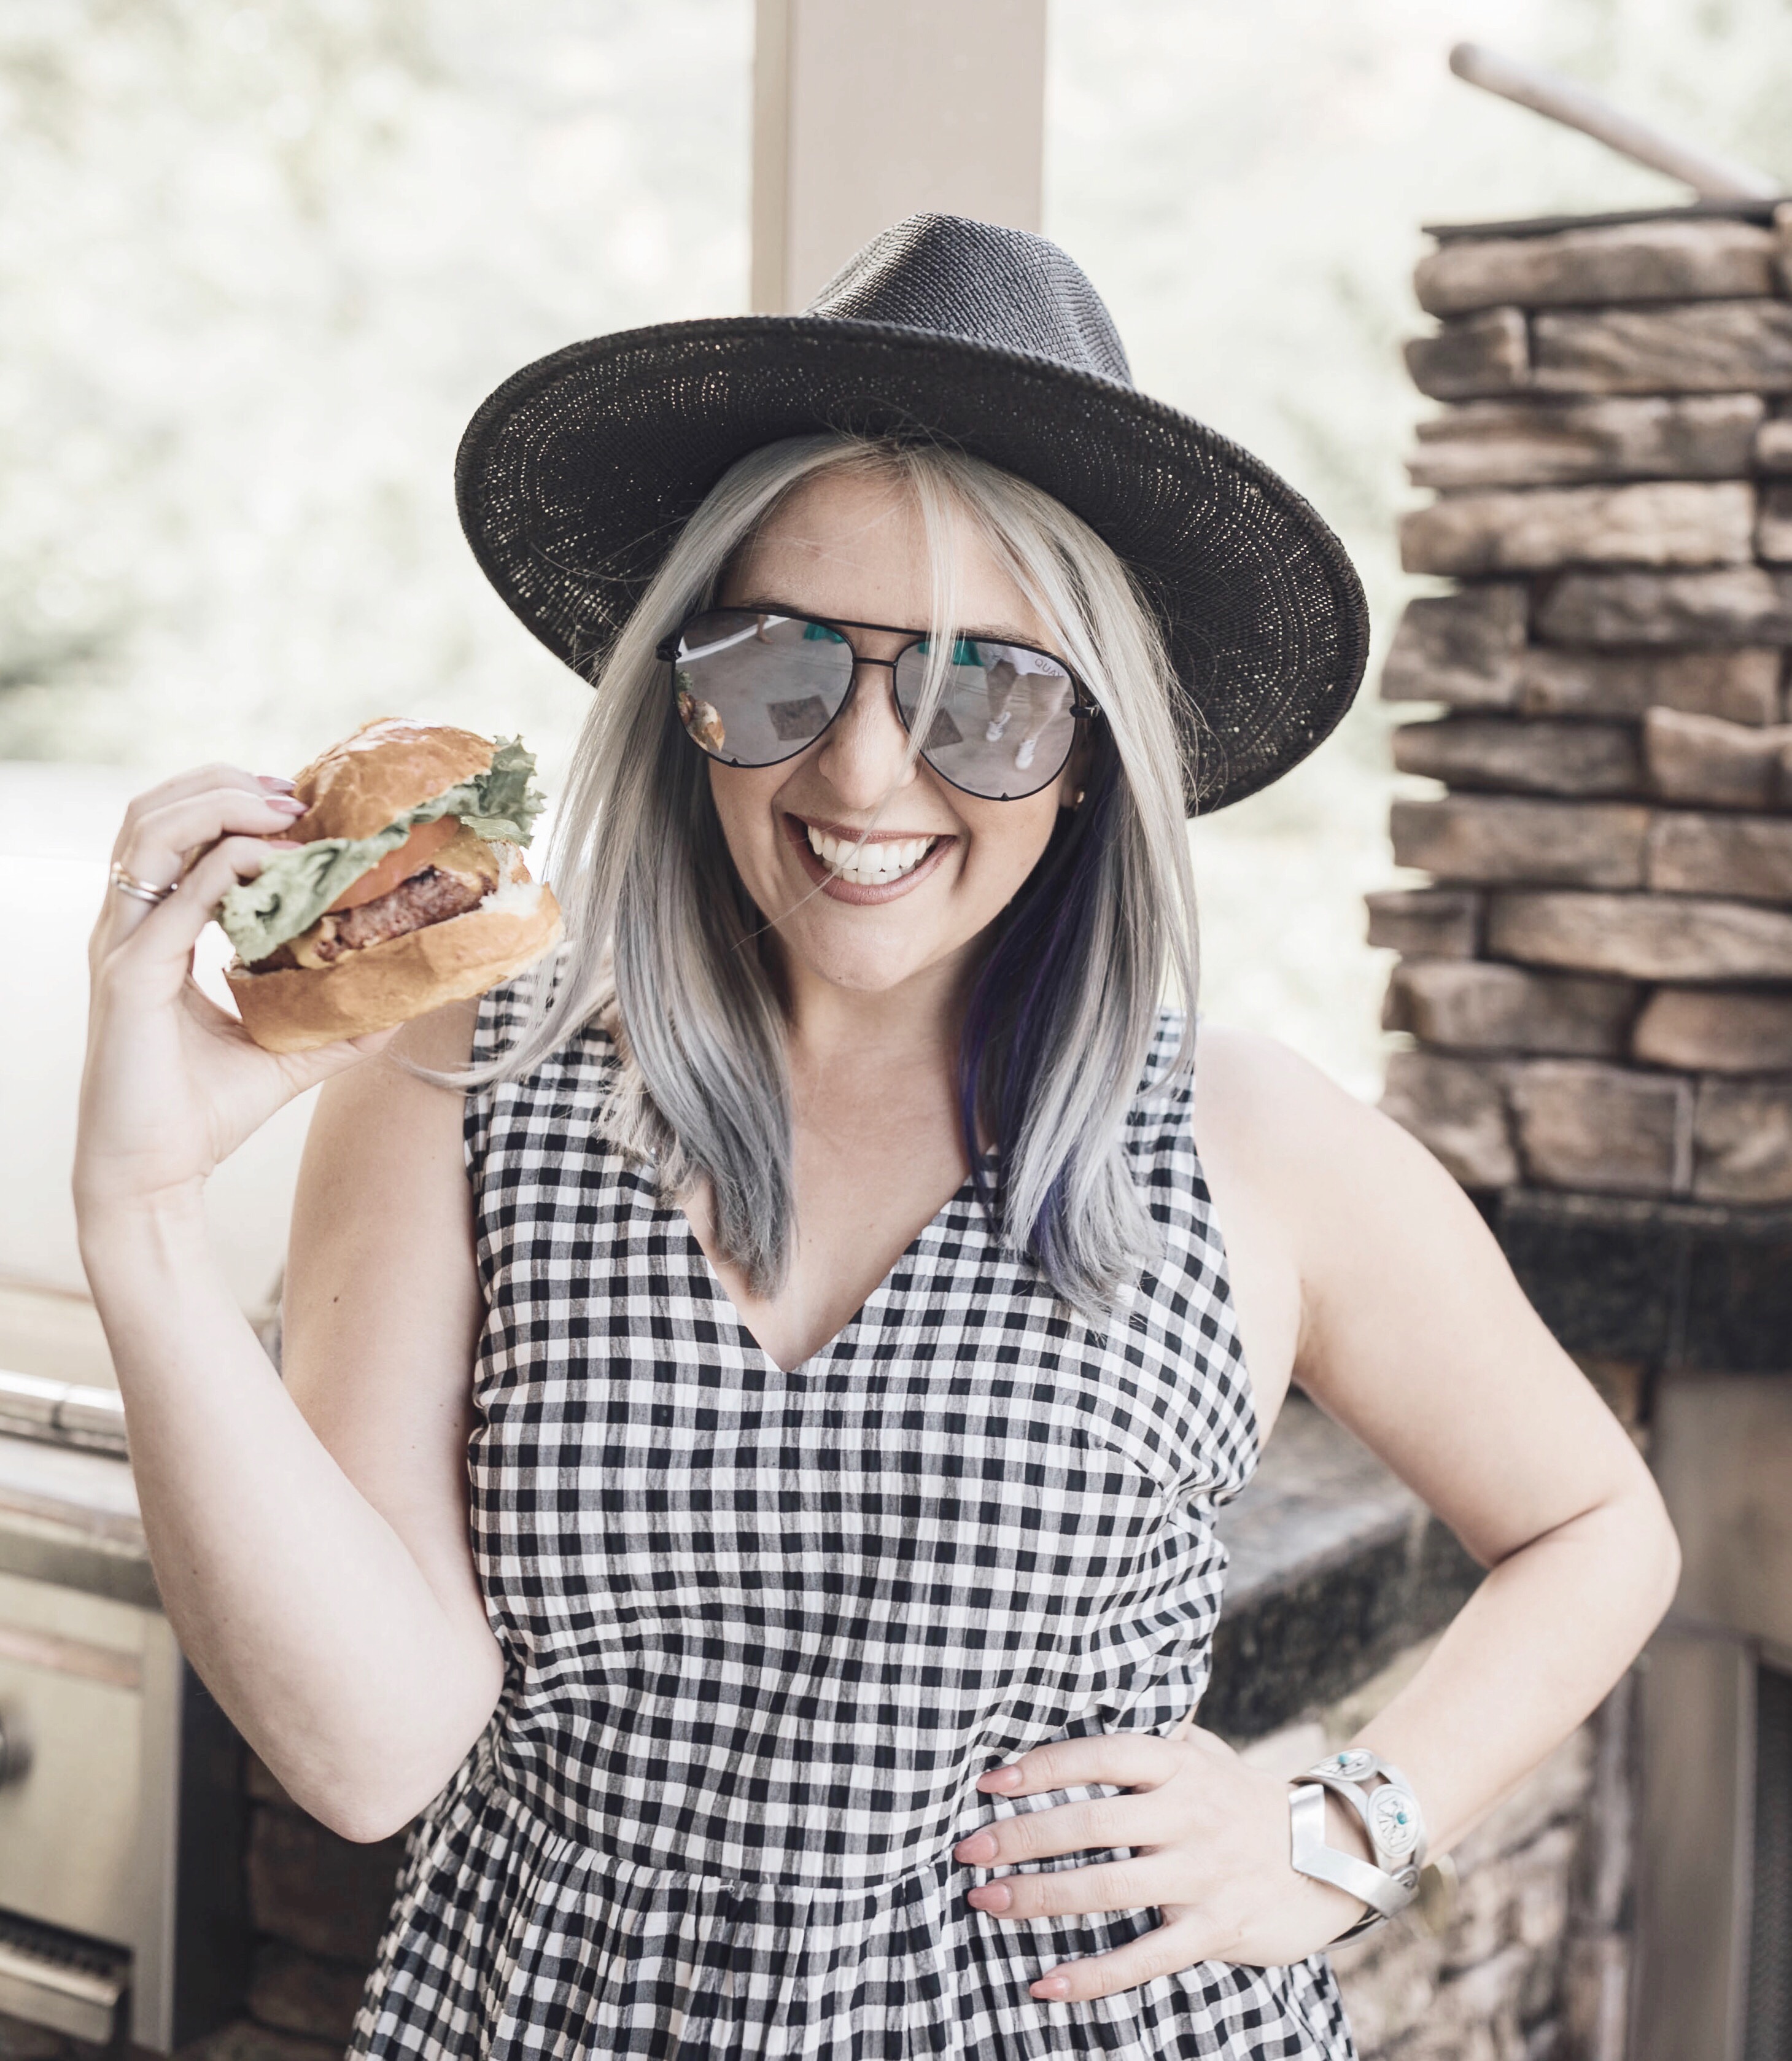 KatWalkSF, Kat Ensign, Top Fashion Blogger, Fashionista, Fashion Blogger, San Francisco Blogger, Summer Trends, Summer Style, Gingham Trend, Tablecloth Style, OOTD, WIW, Blogger Style